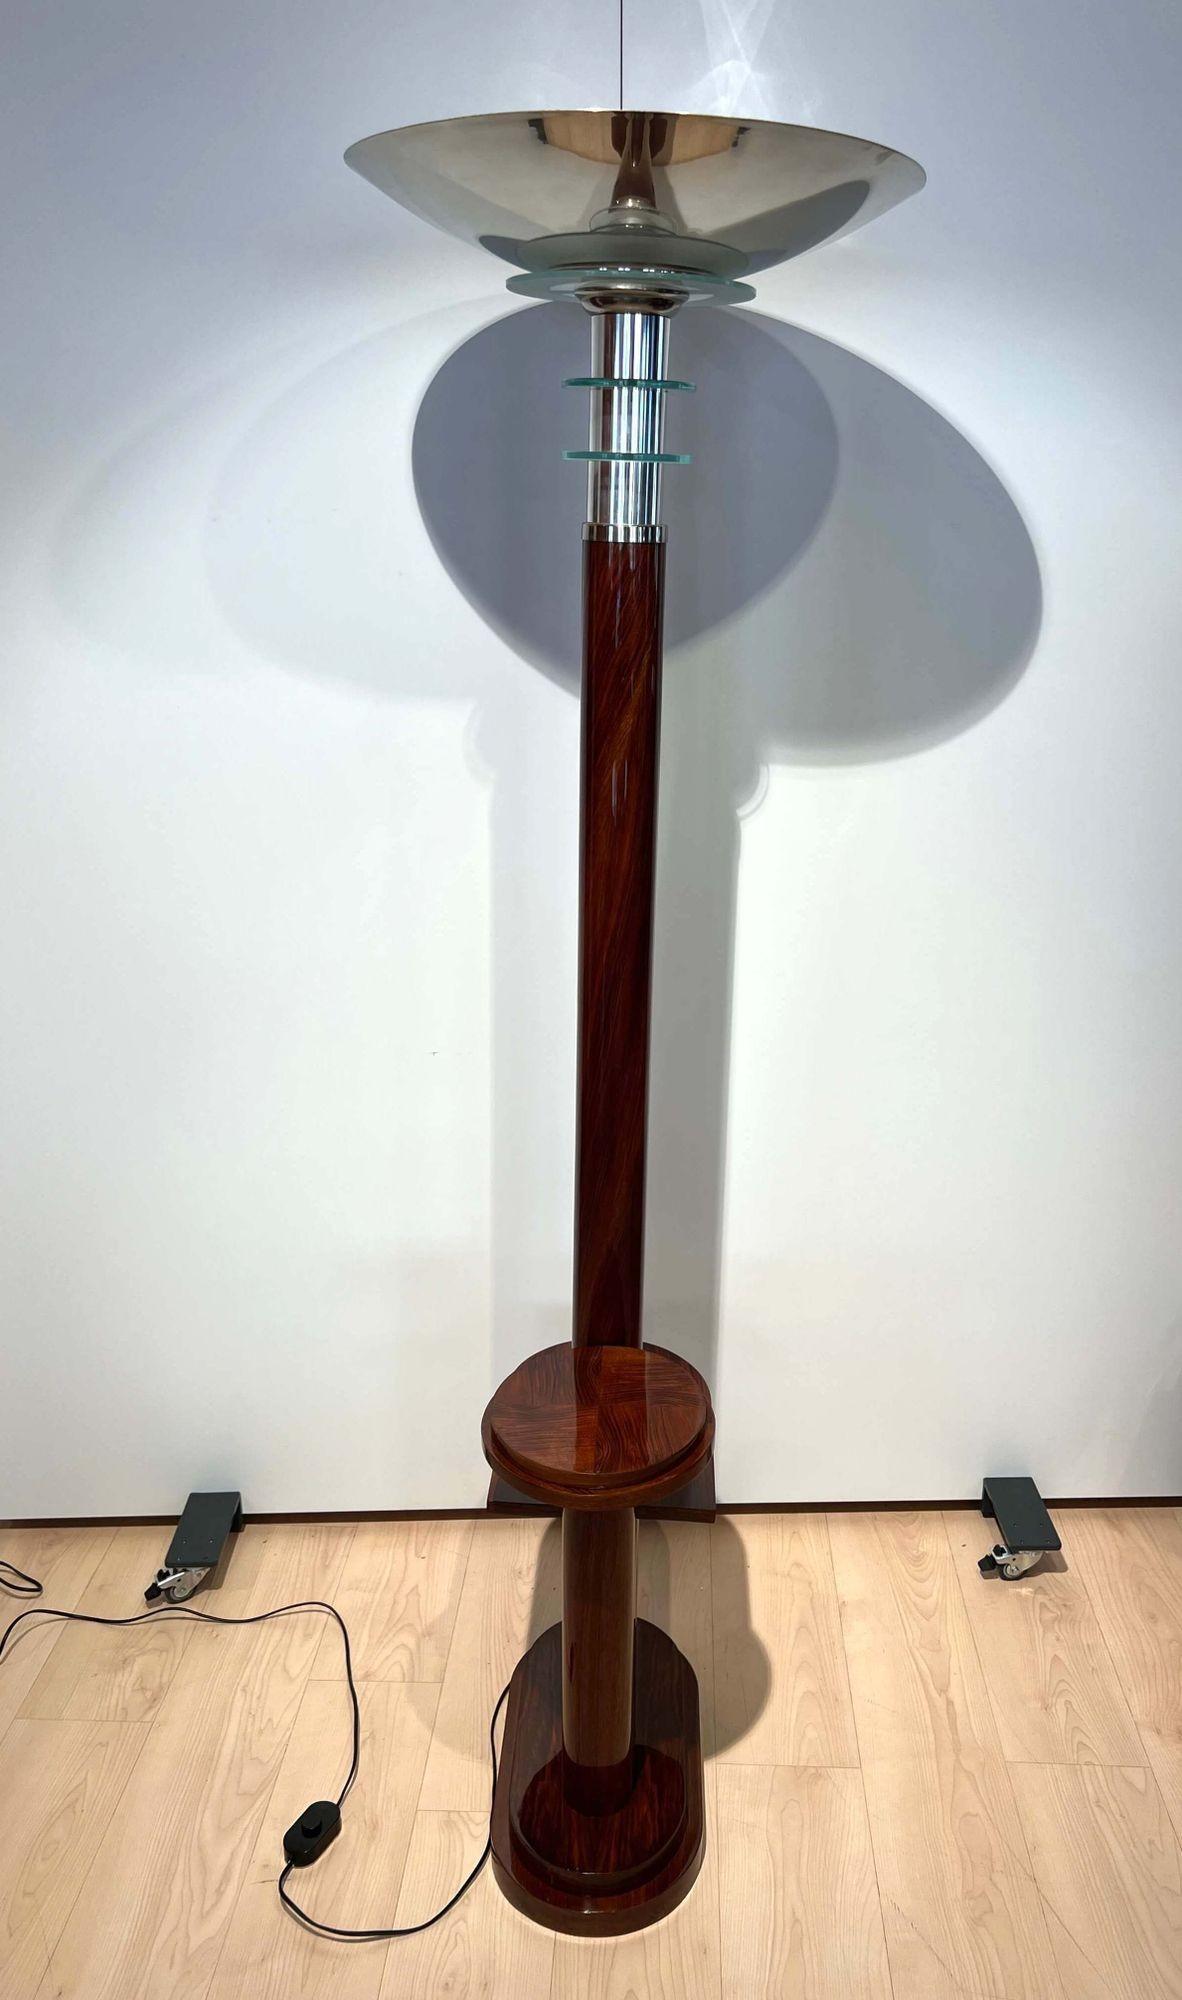 Galvanized Art Deco Floor Lamp with Side Table, Walnut and Chrome, France, circa 1930 For Sale